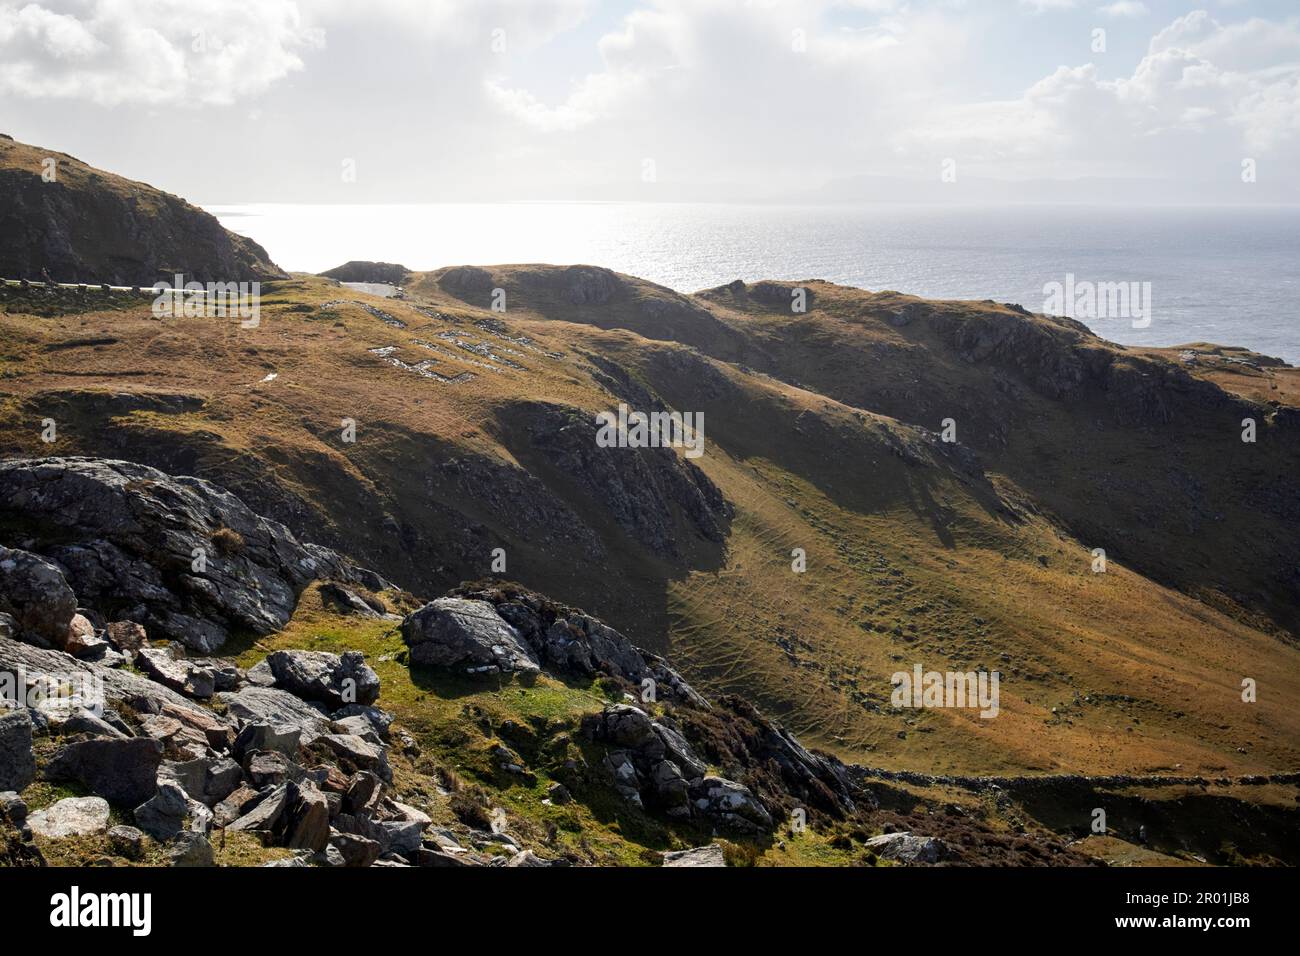 eire 71 stone marking on cliffs near slieve league county donegal republic of ireland Stock Photo